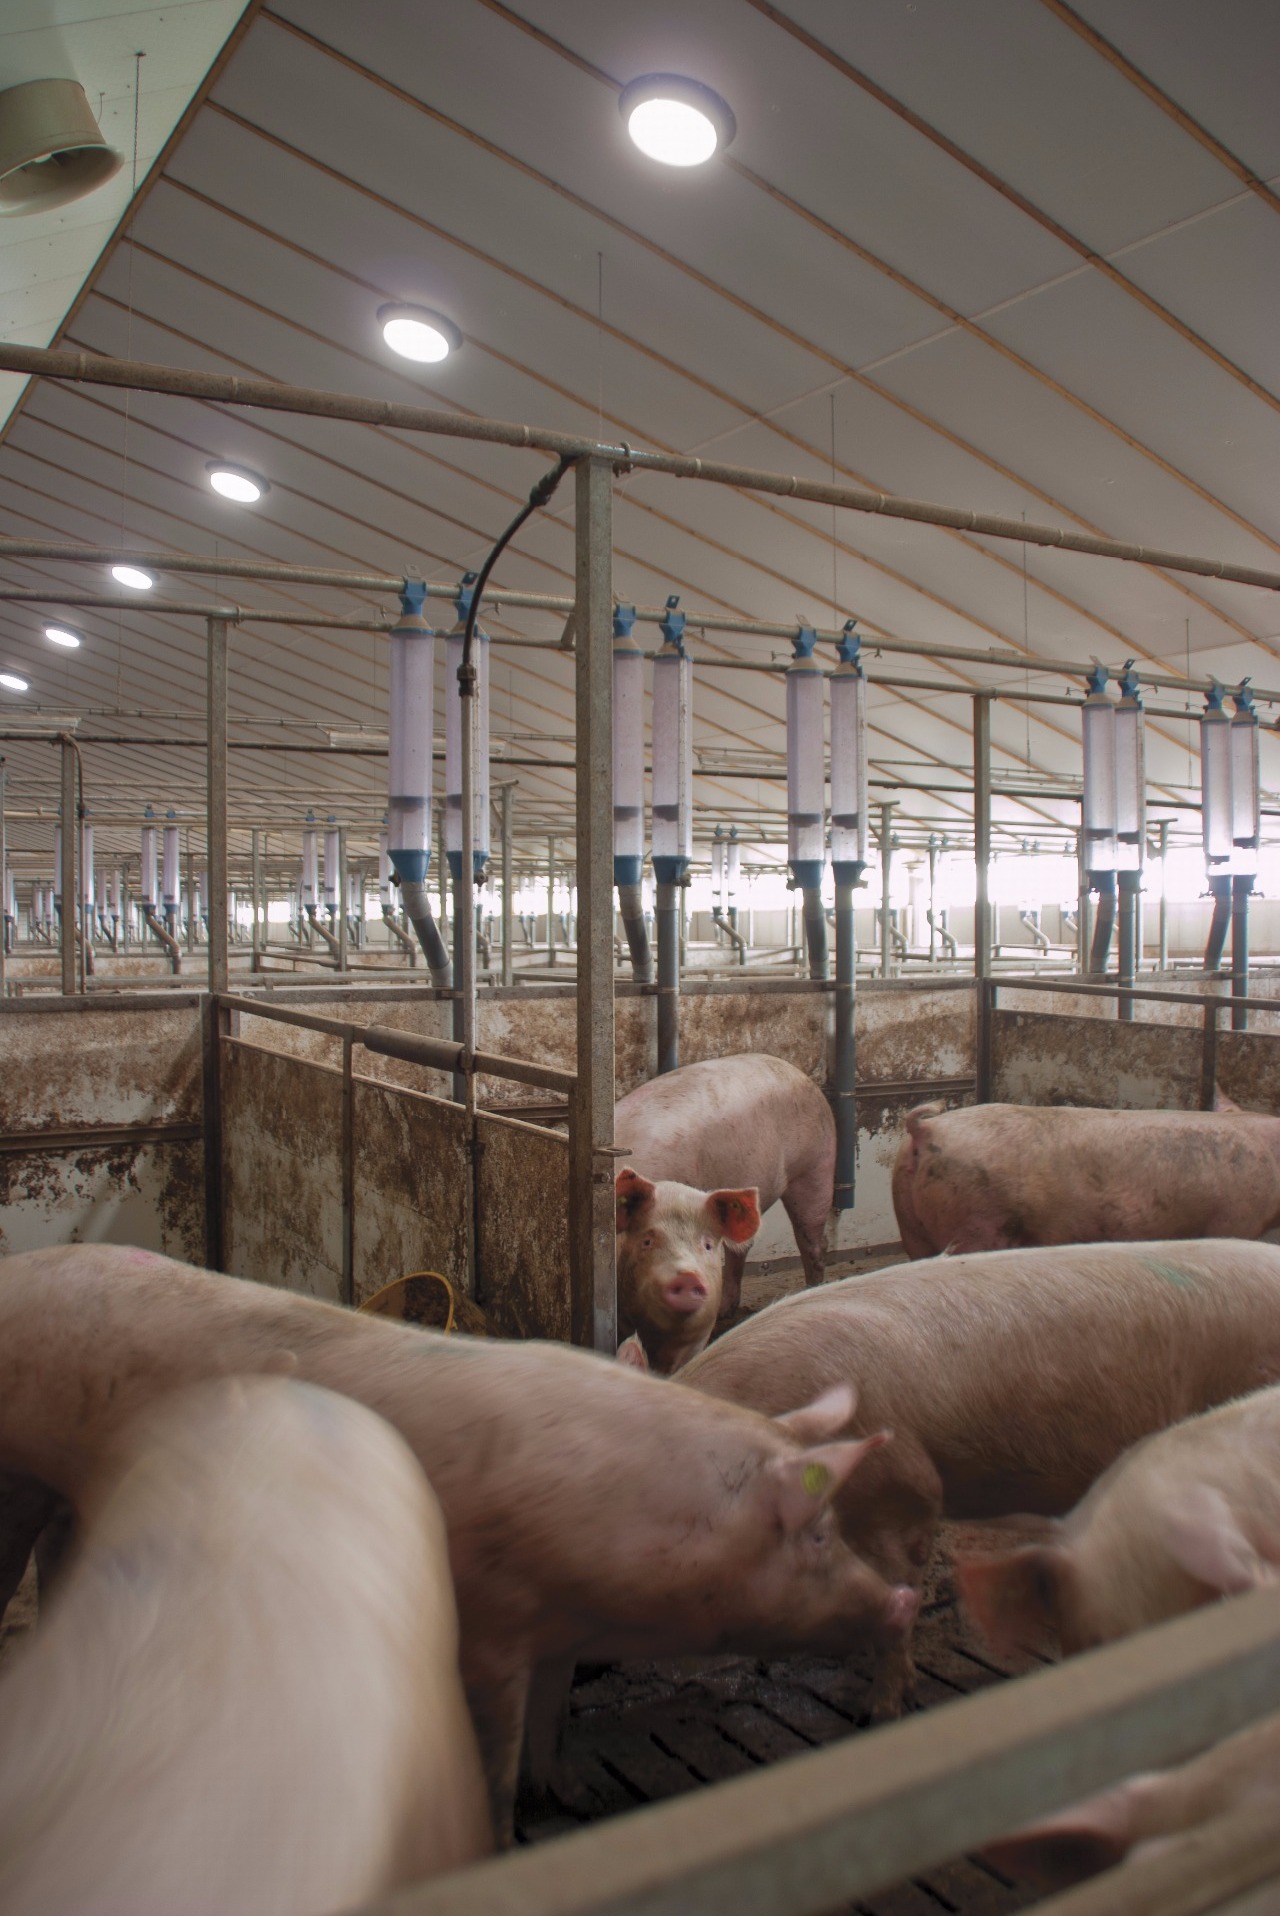 More pigs enjoy beautiful natural daylight from the ceiling